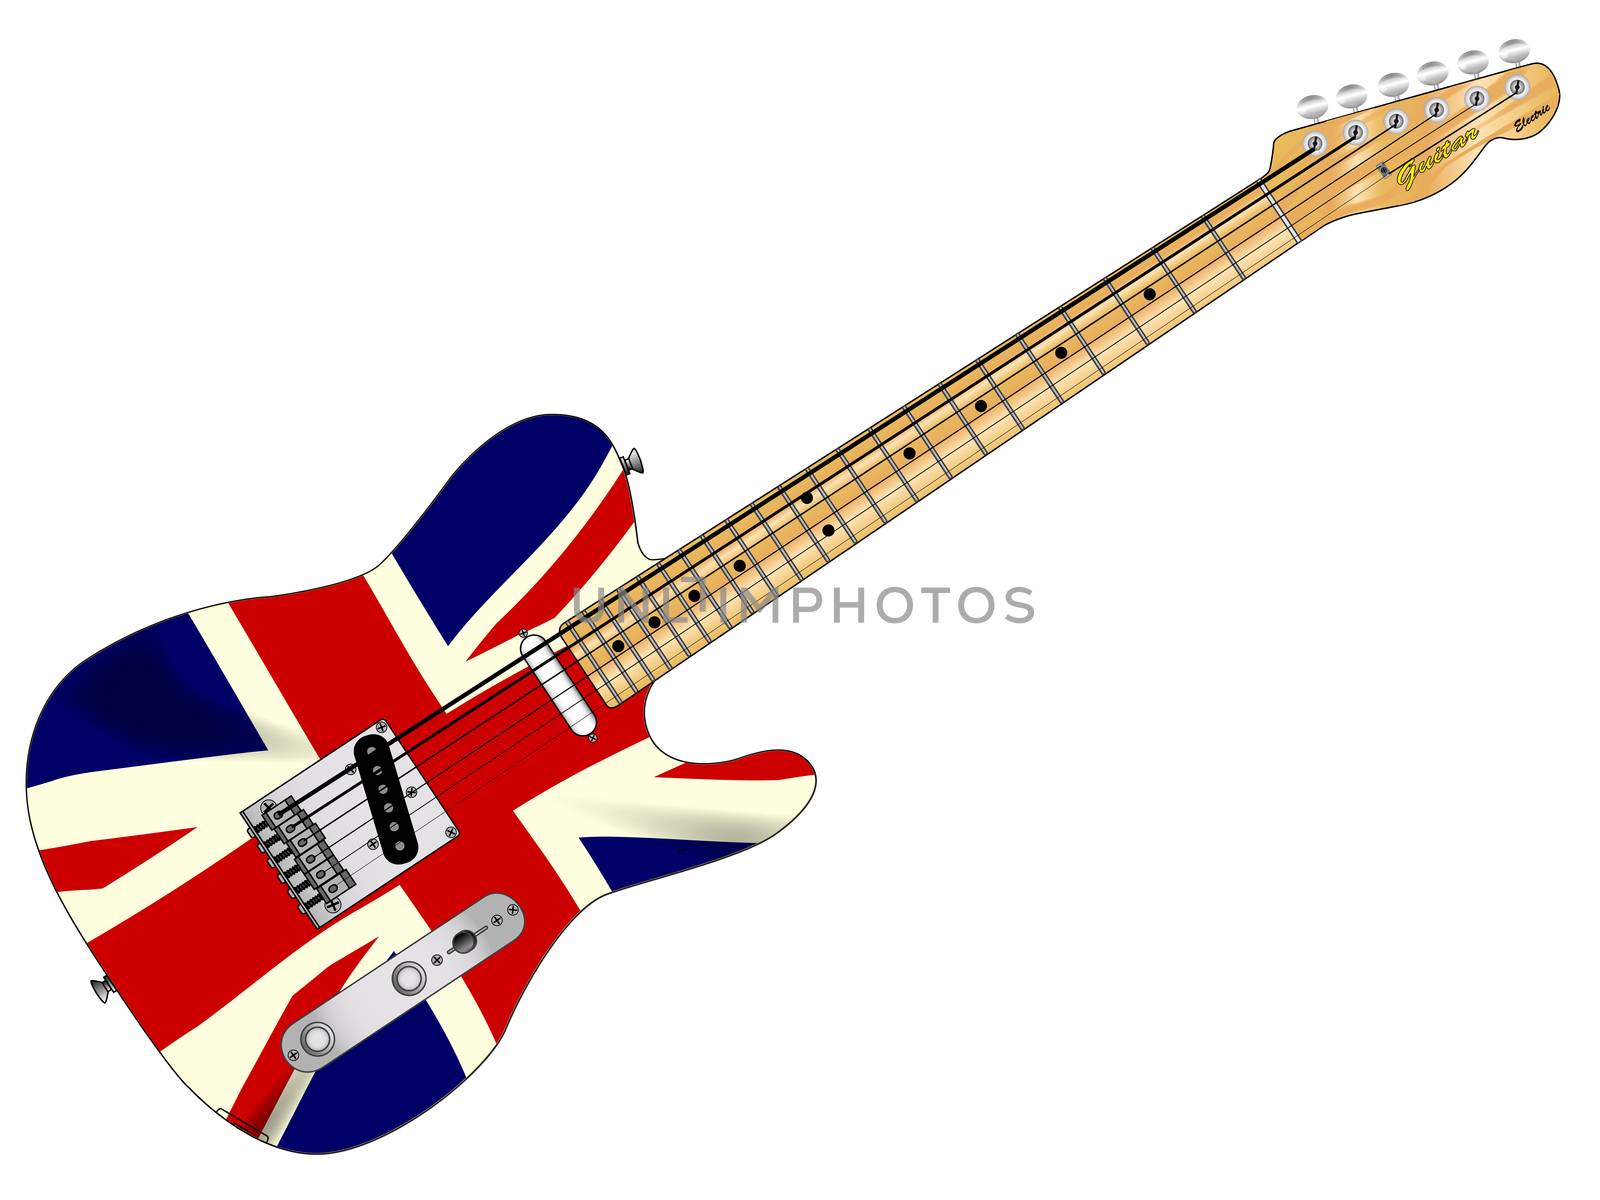 A classic electric guitar with the Union Jack flag over white